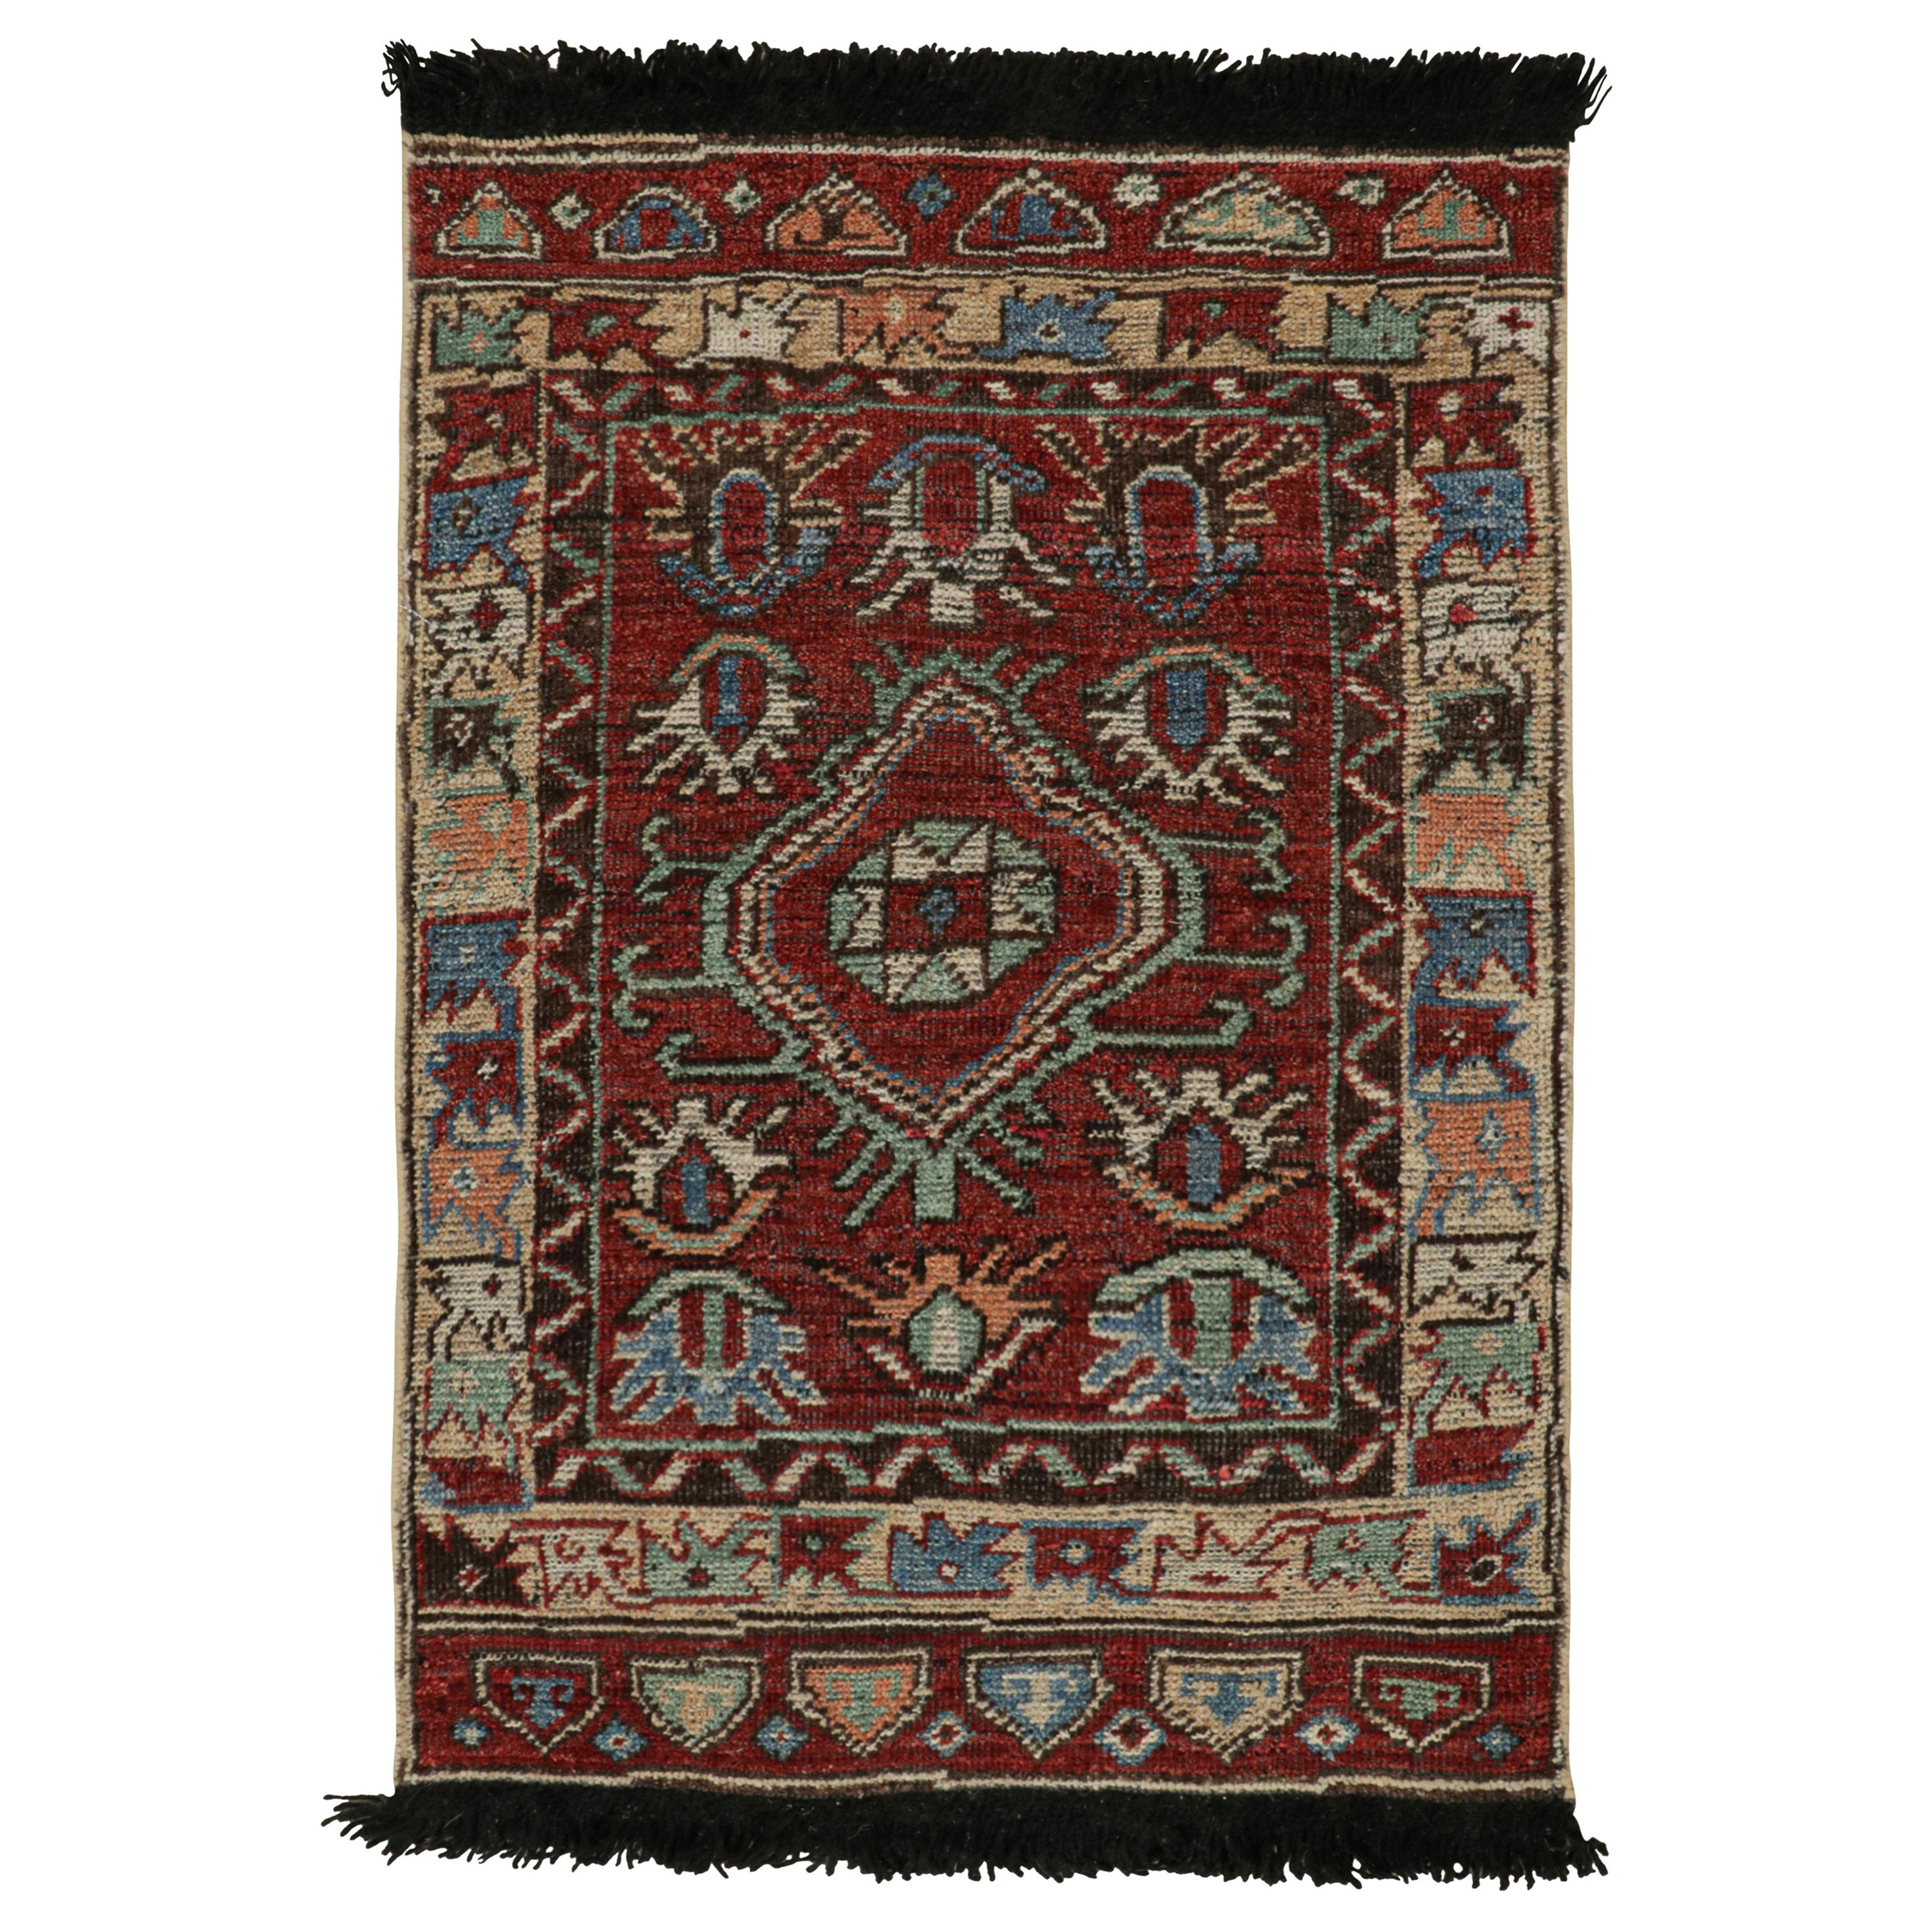 Rug & Kilim’s Antique Tribal Style Rug in Red, Blue, Green & Black Patterns